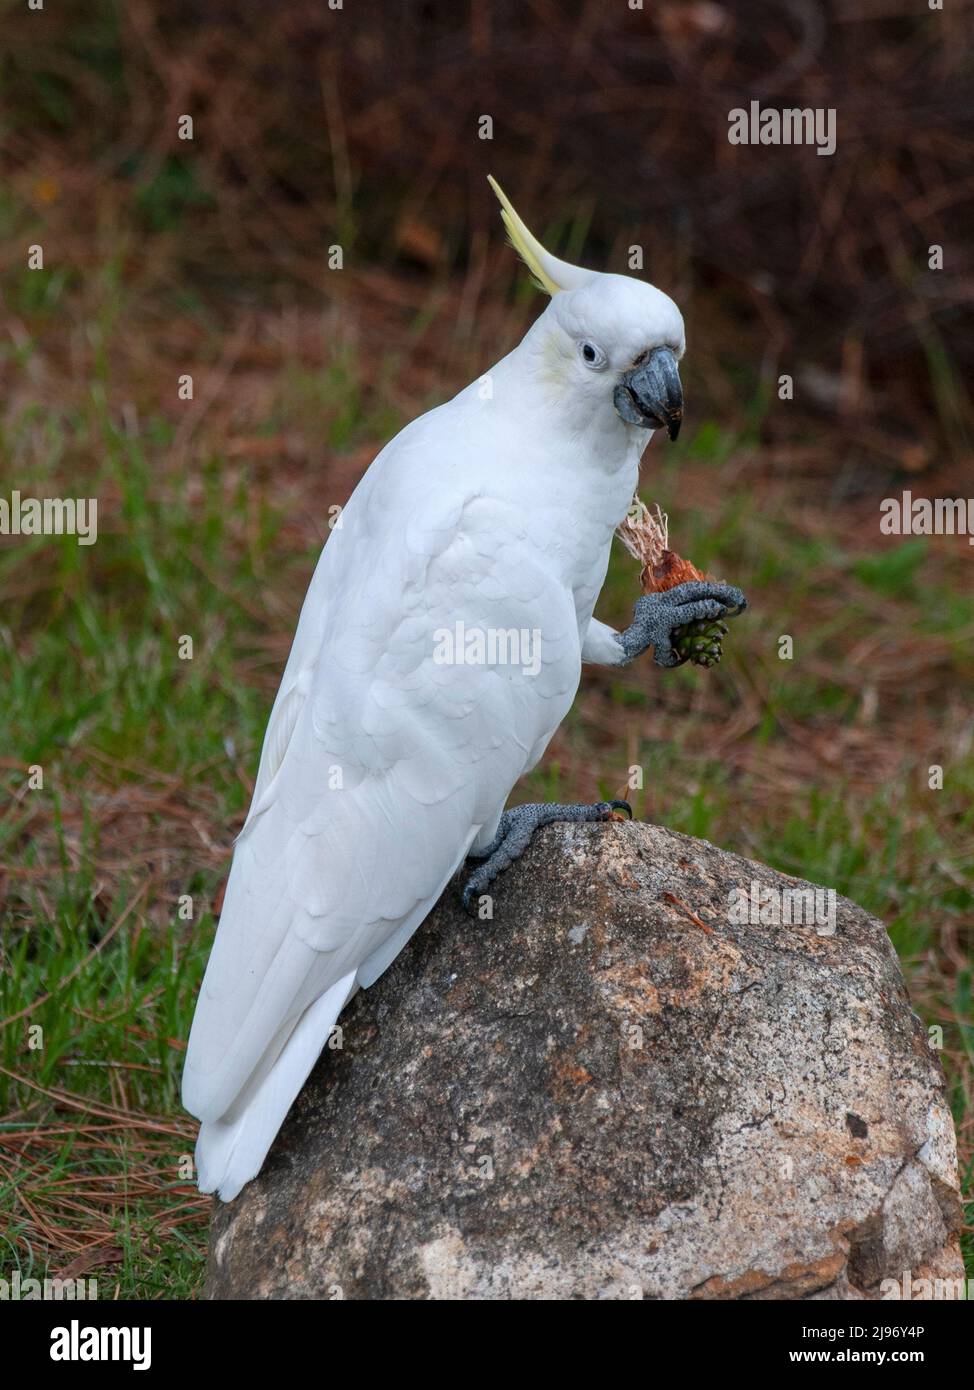 The yellow-crested cockatoo also known as the lesser sulphur-crested cockatoo, is a medium-sized cockatoo, seen eating a pine cone Stock Photo